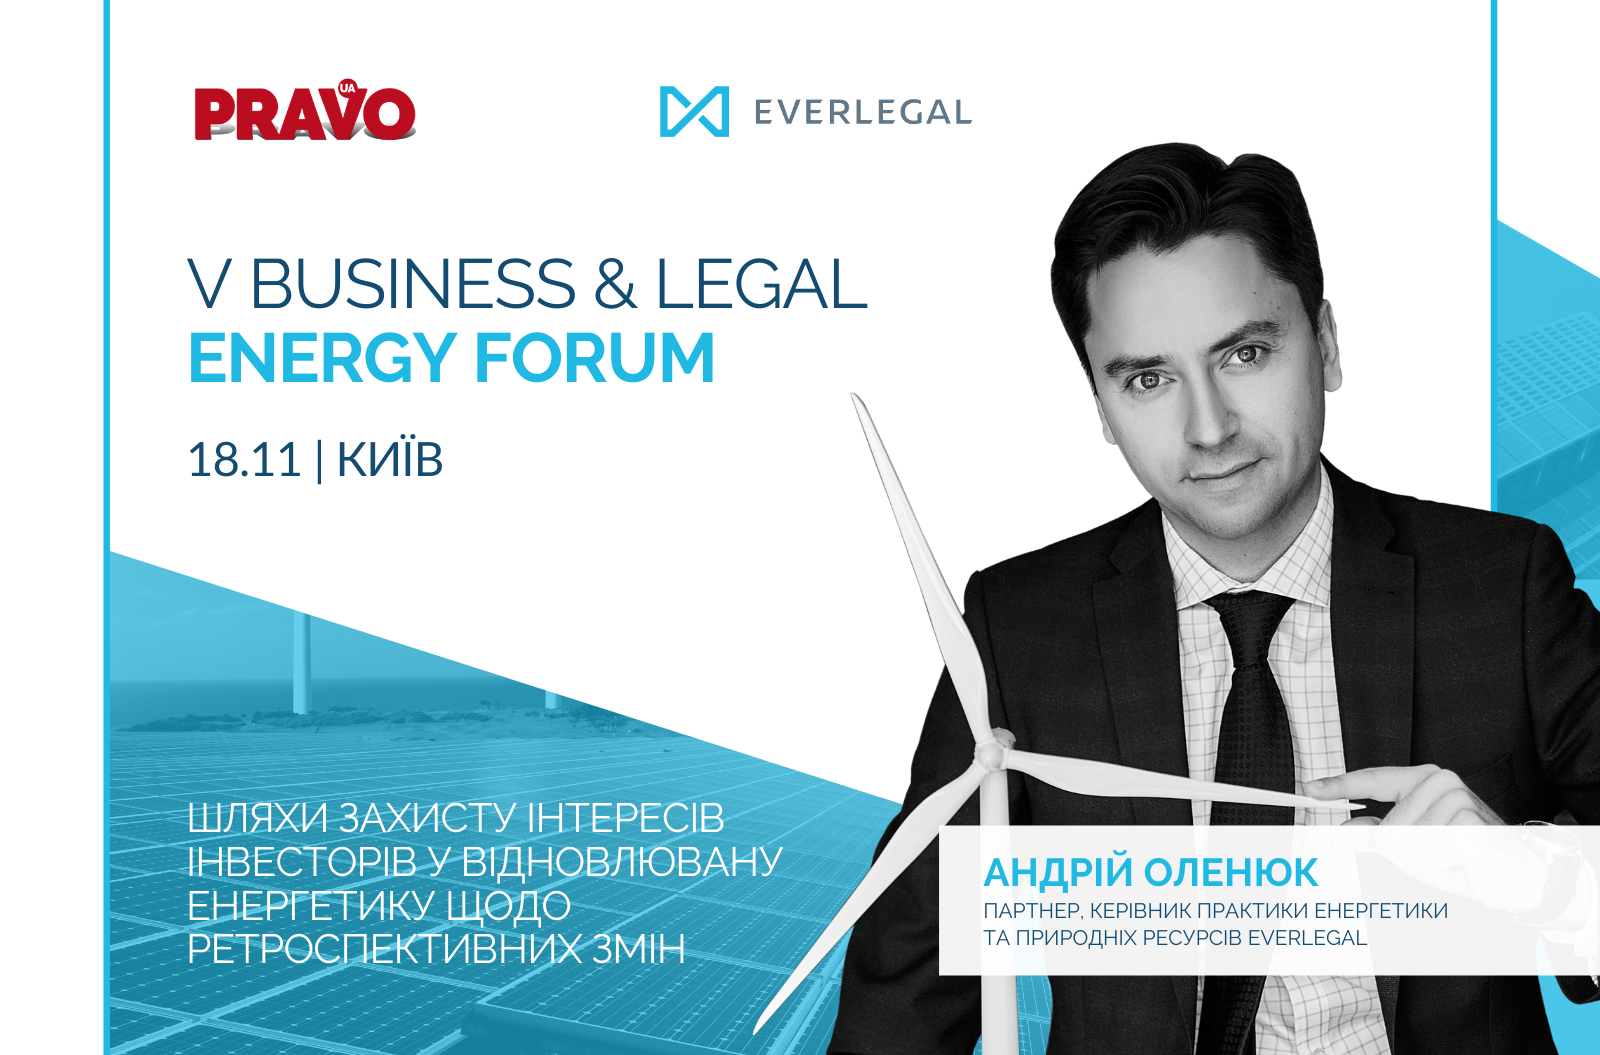 EVERLEGAL is inviting to the V Business & Legal Energy Forum